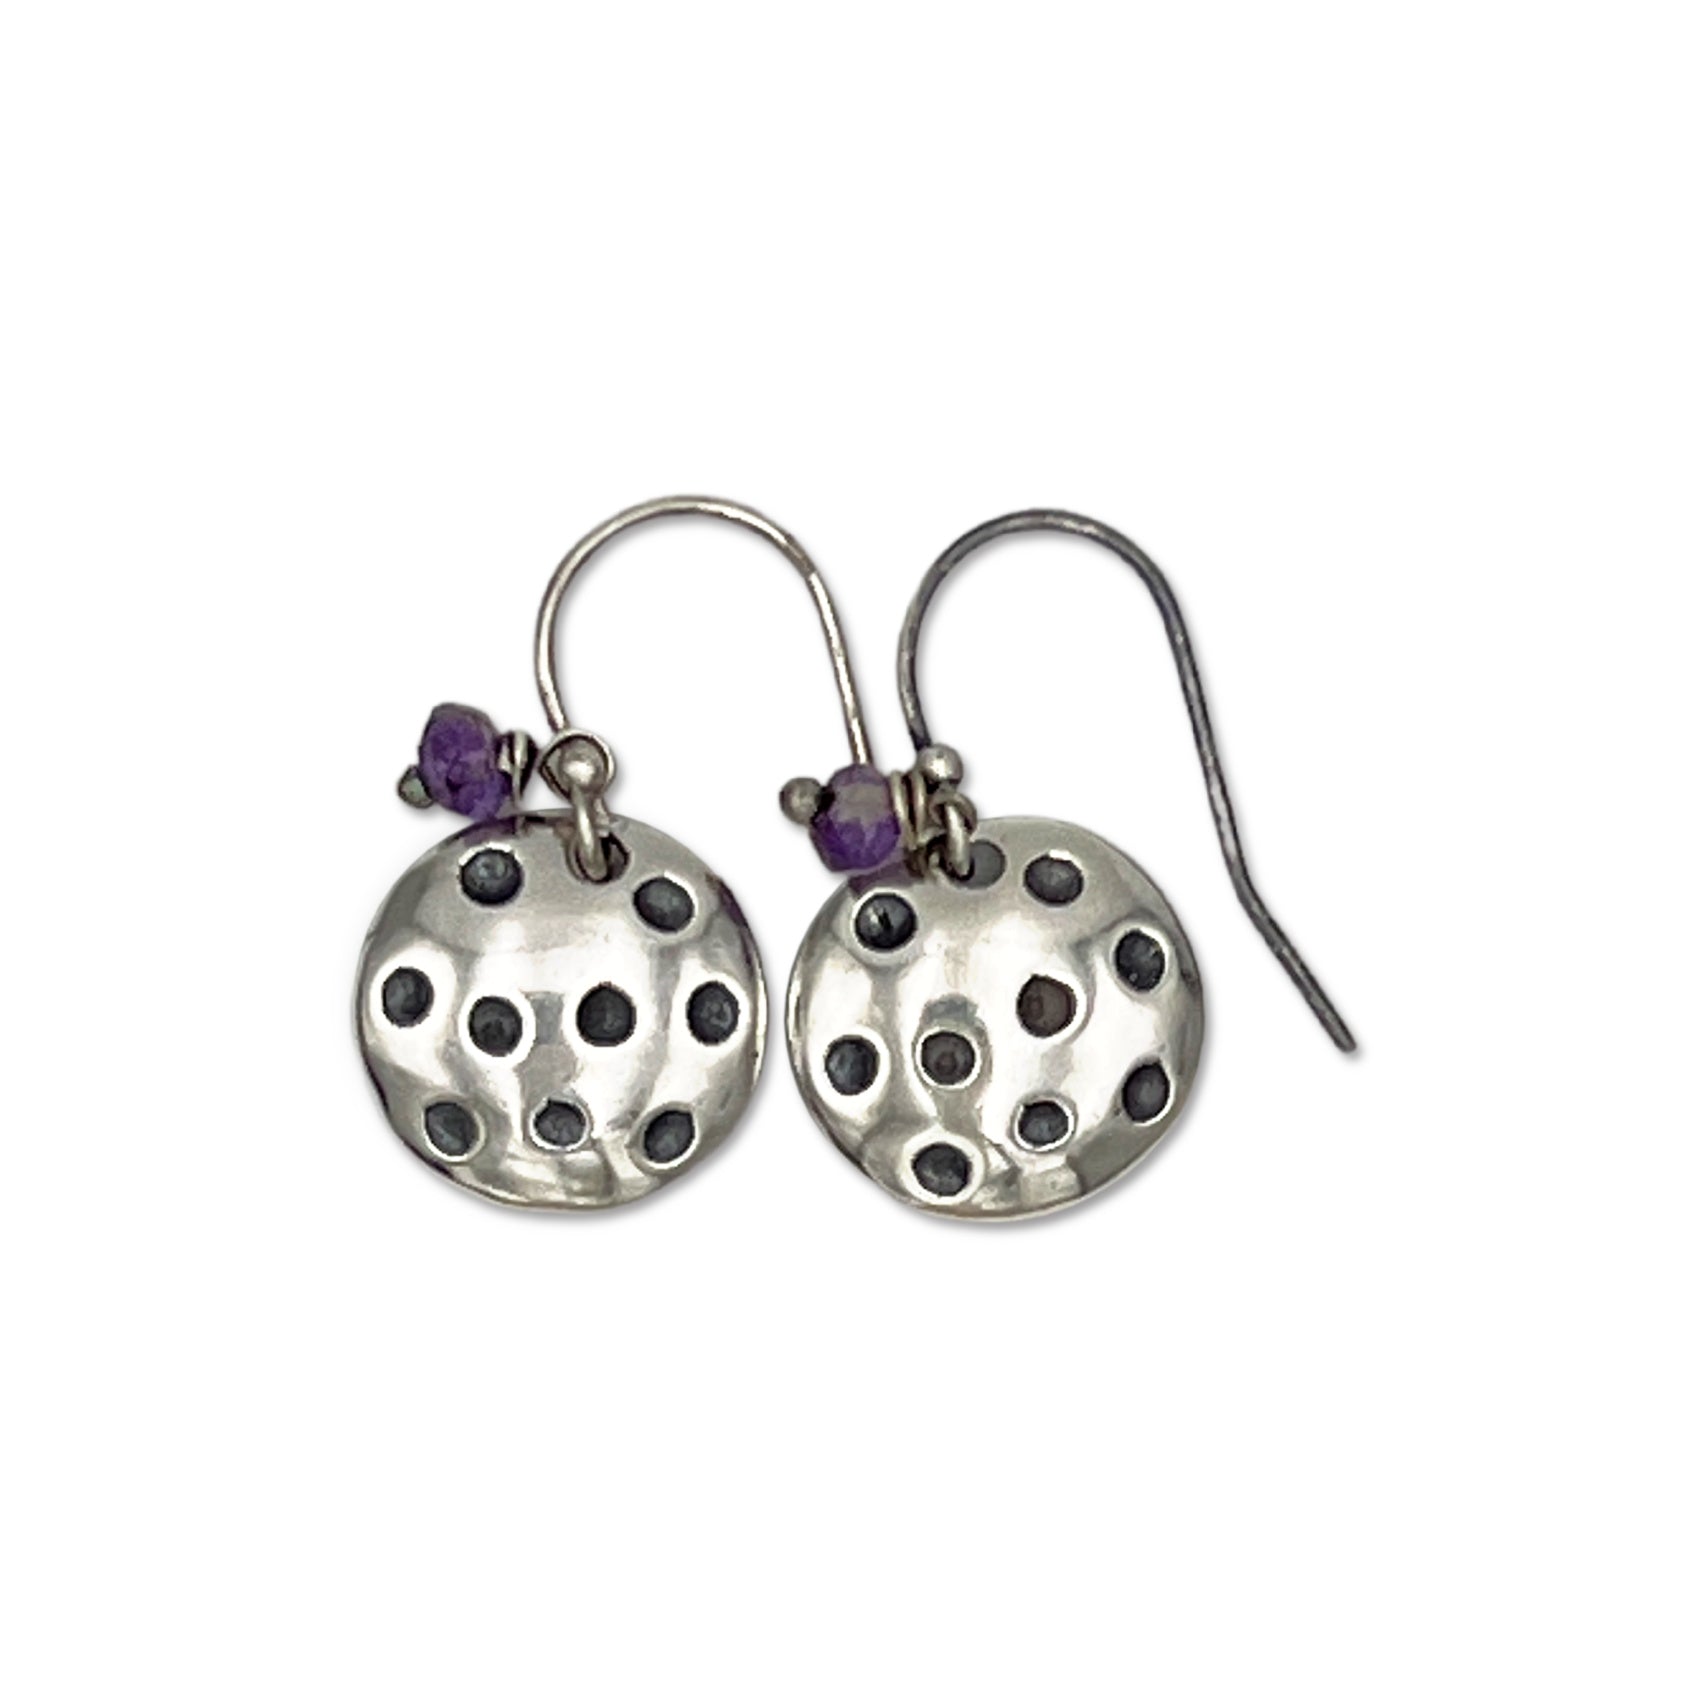 Pickle Ball Earrings with Amethyst